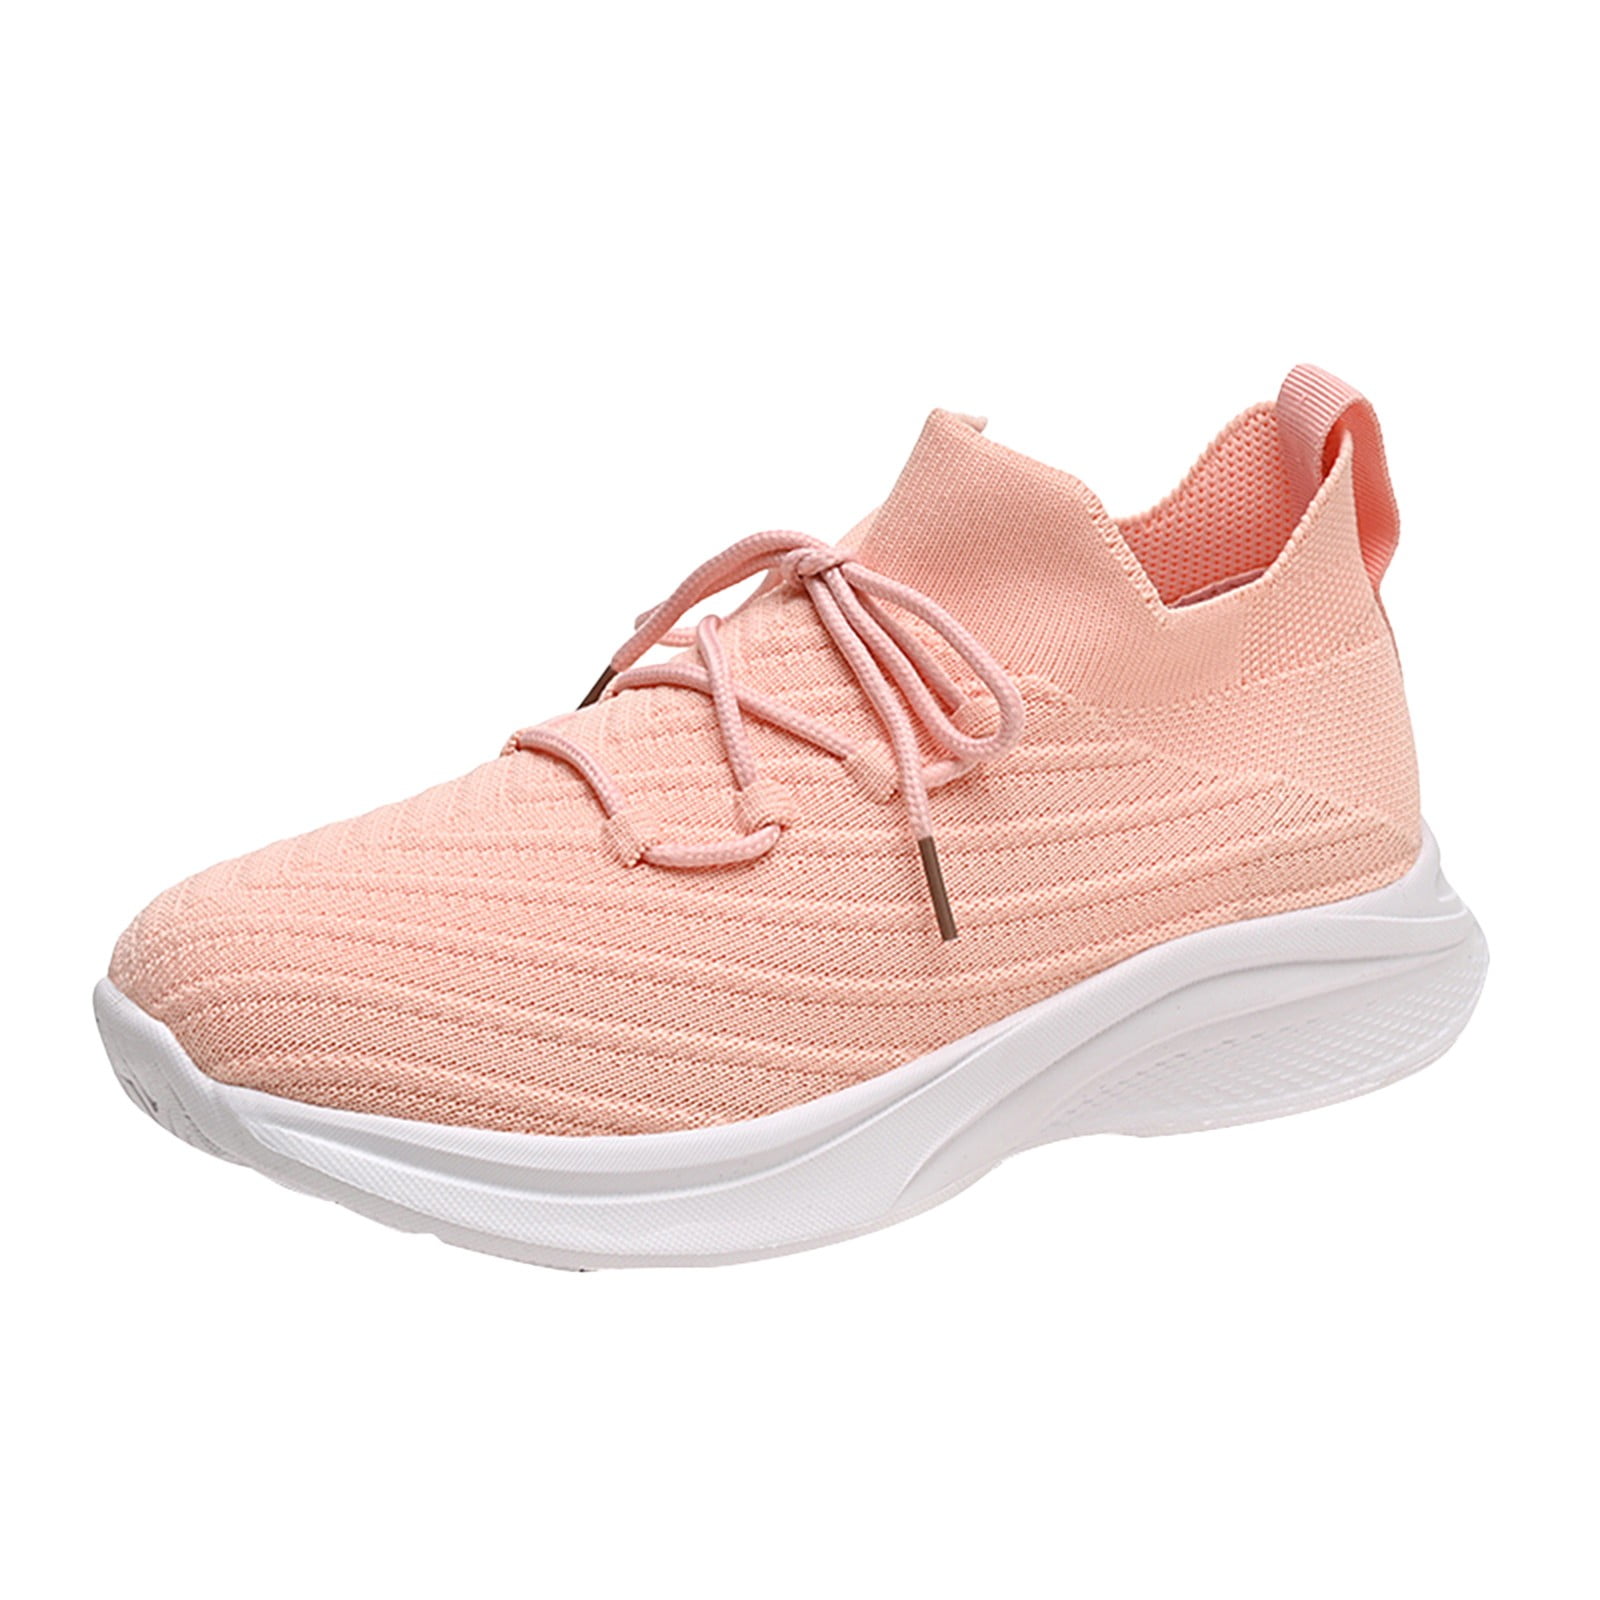 Puma Suede Shoes Womens 9 Peach Low Top Lace Up Sneakers Casual | eBay